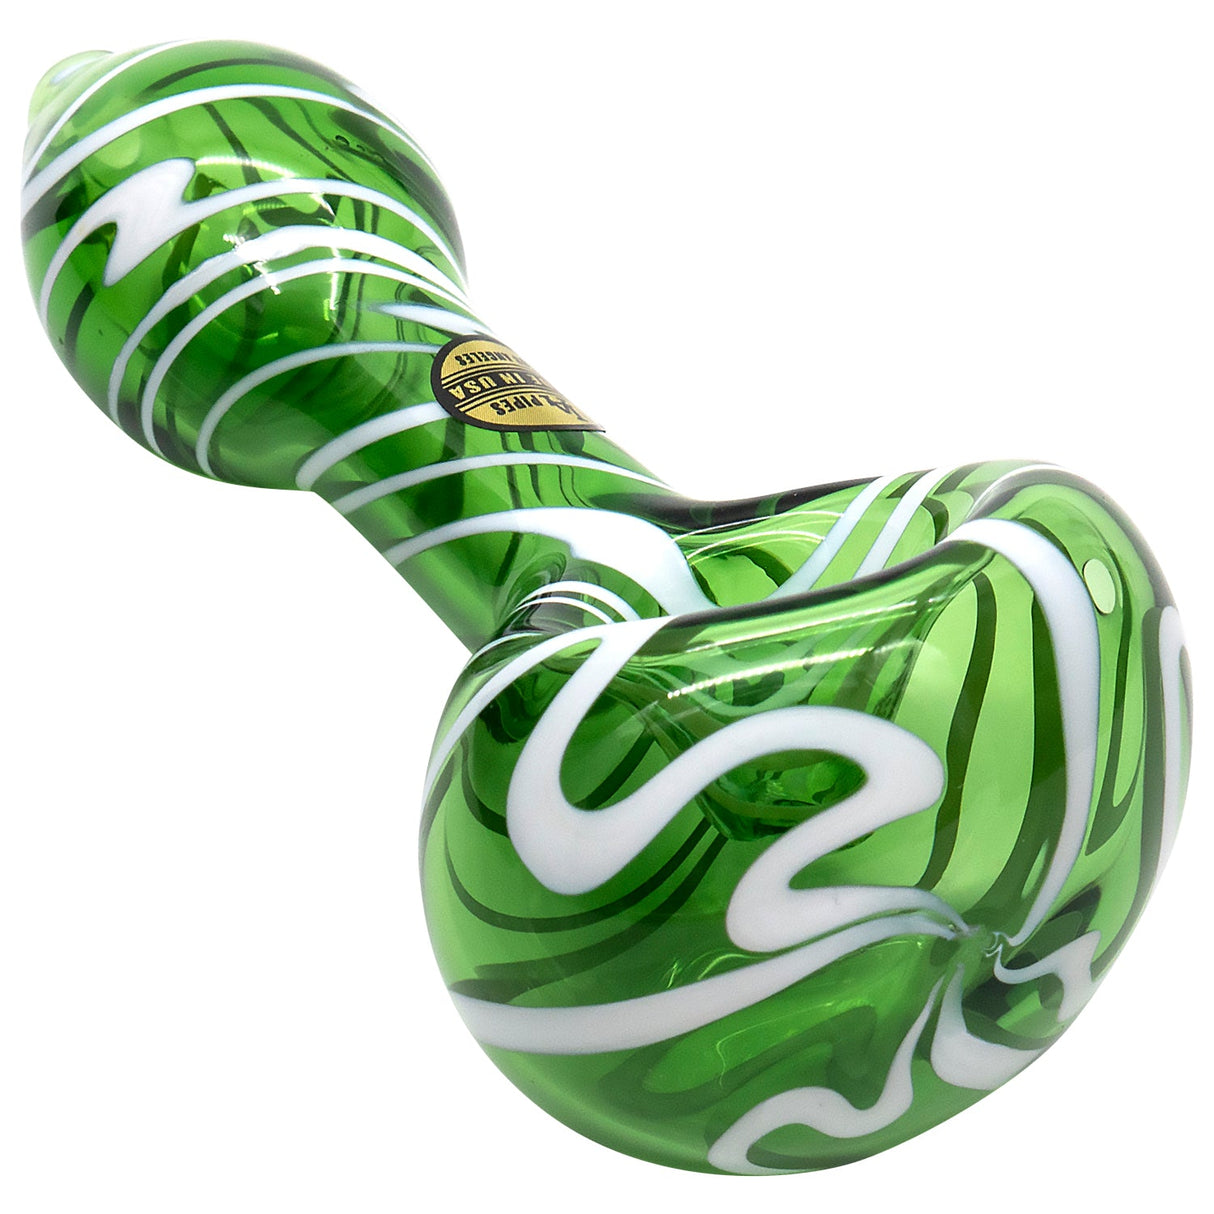 LA Pipes 'Warped Space' Color Glass Hand-Pipe, 4.5 inch, Spoon Design, USA Made